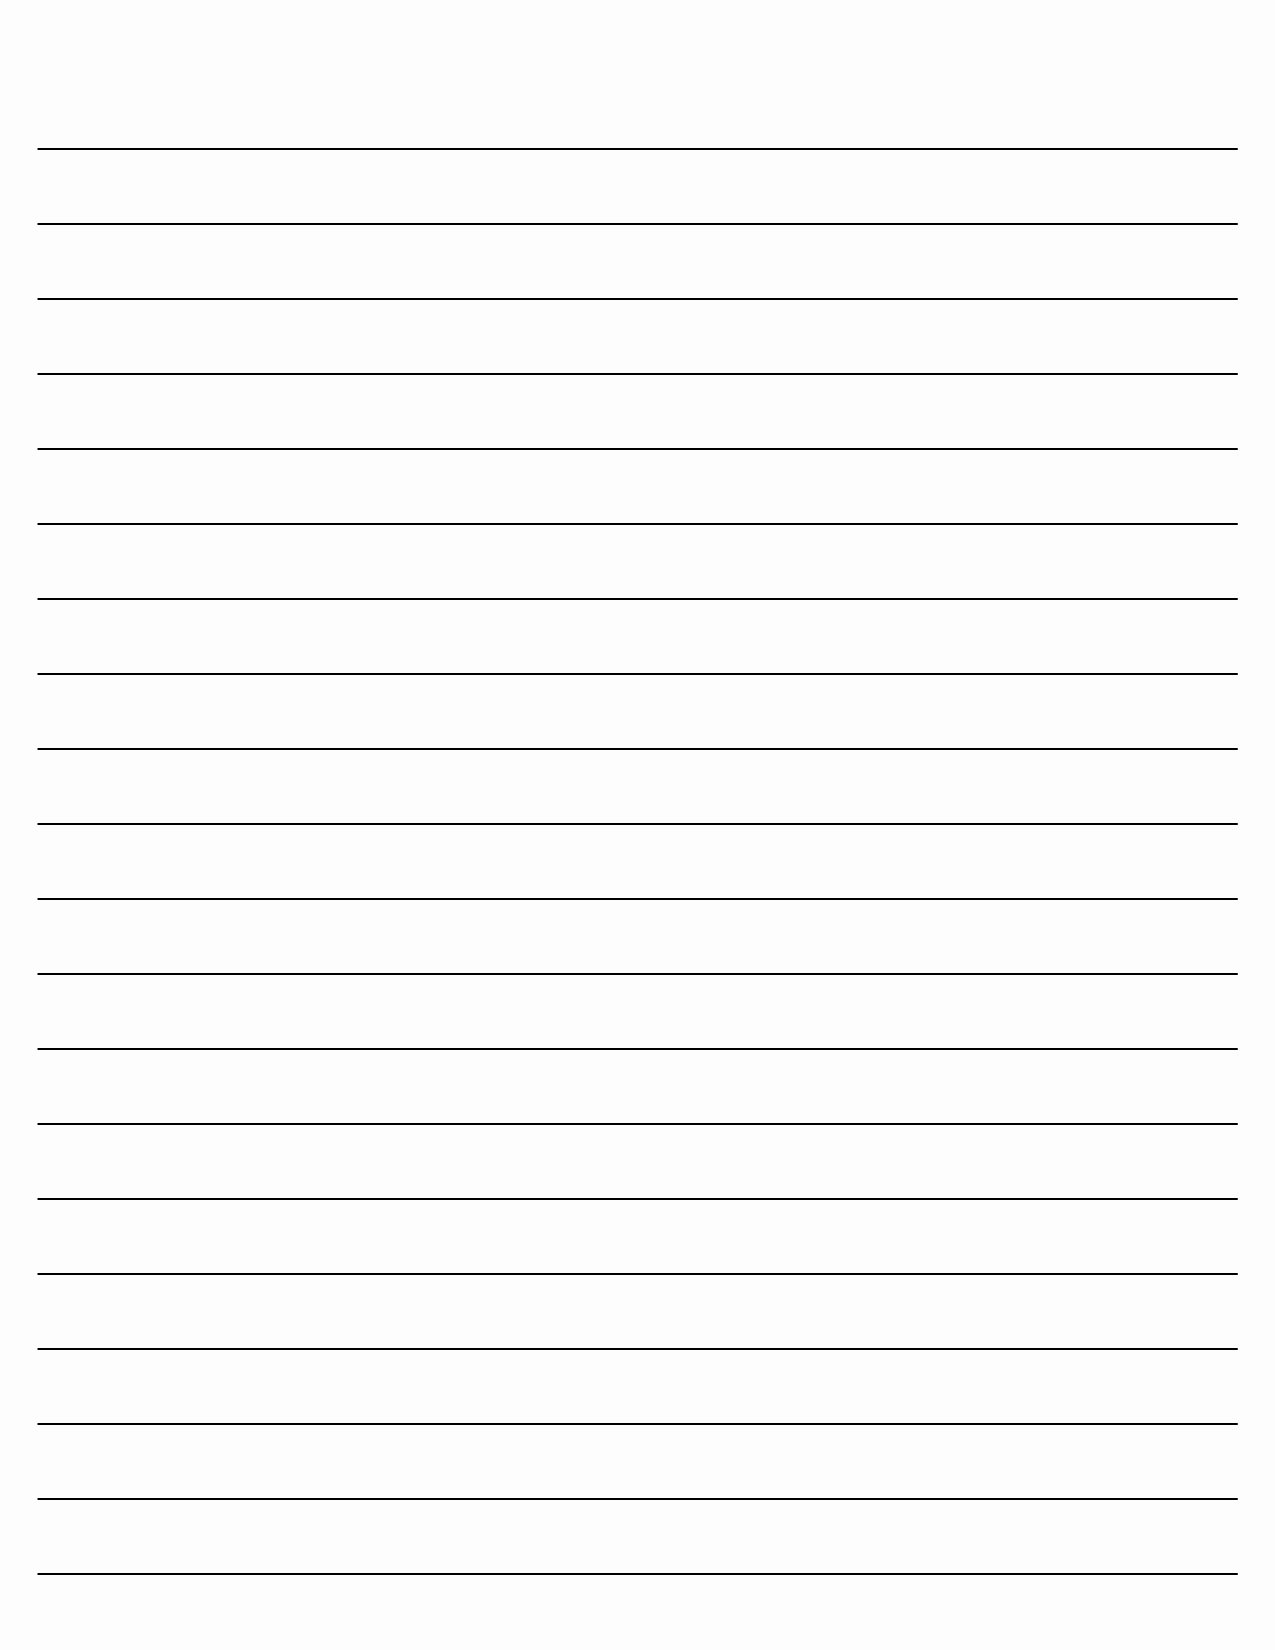 Free Lined Writing Paper Awesome 8 Best Of Printable Journal Paper Templates Free